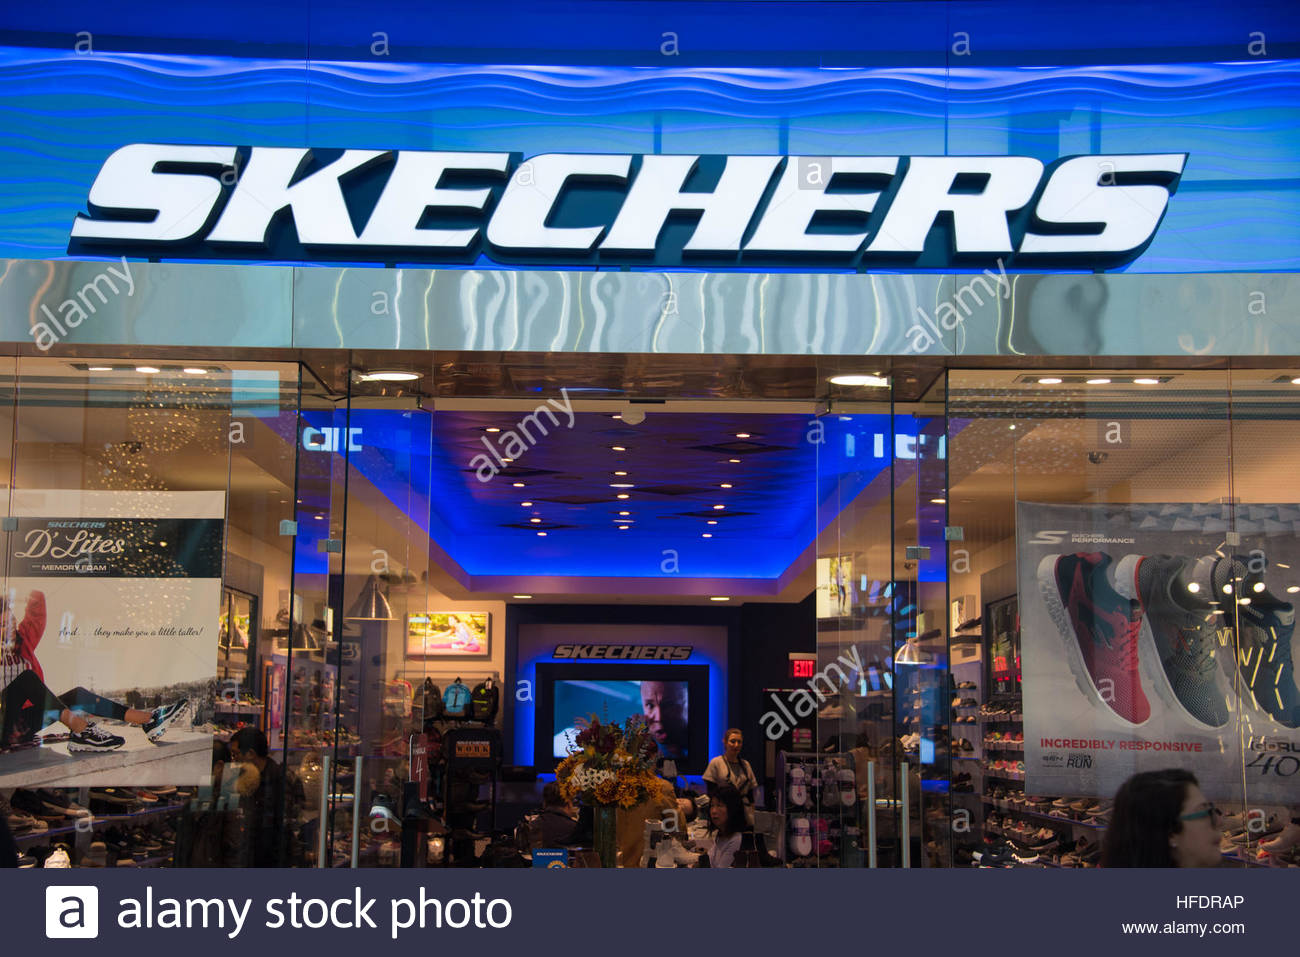 skechers about company